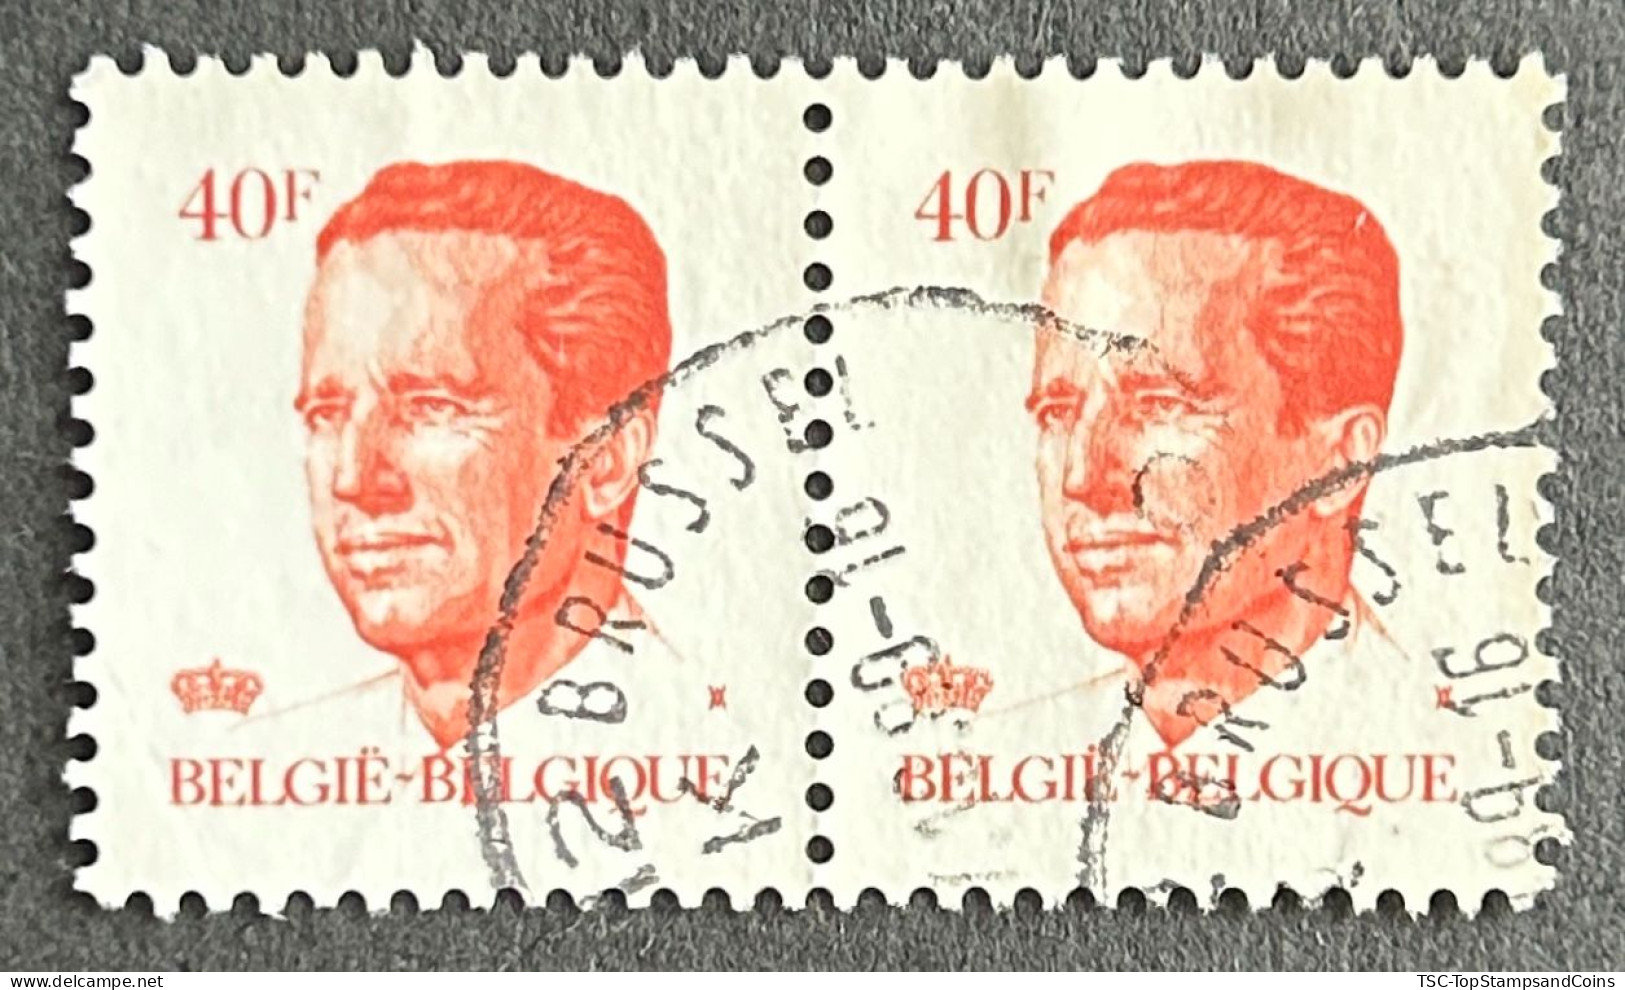 BEL2136Ux2h - King Baudouin 1st. - Pair Of 40 F Used Stamps - Belgium - 1984 - 1981-1990 Velghe